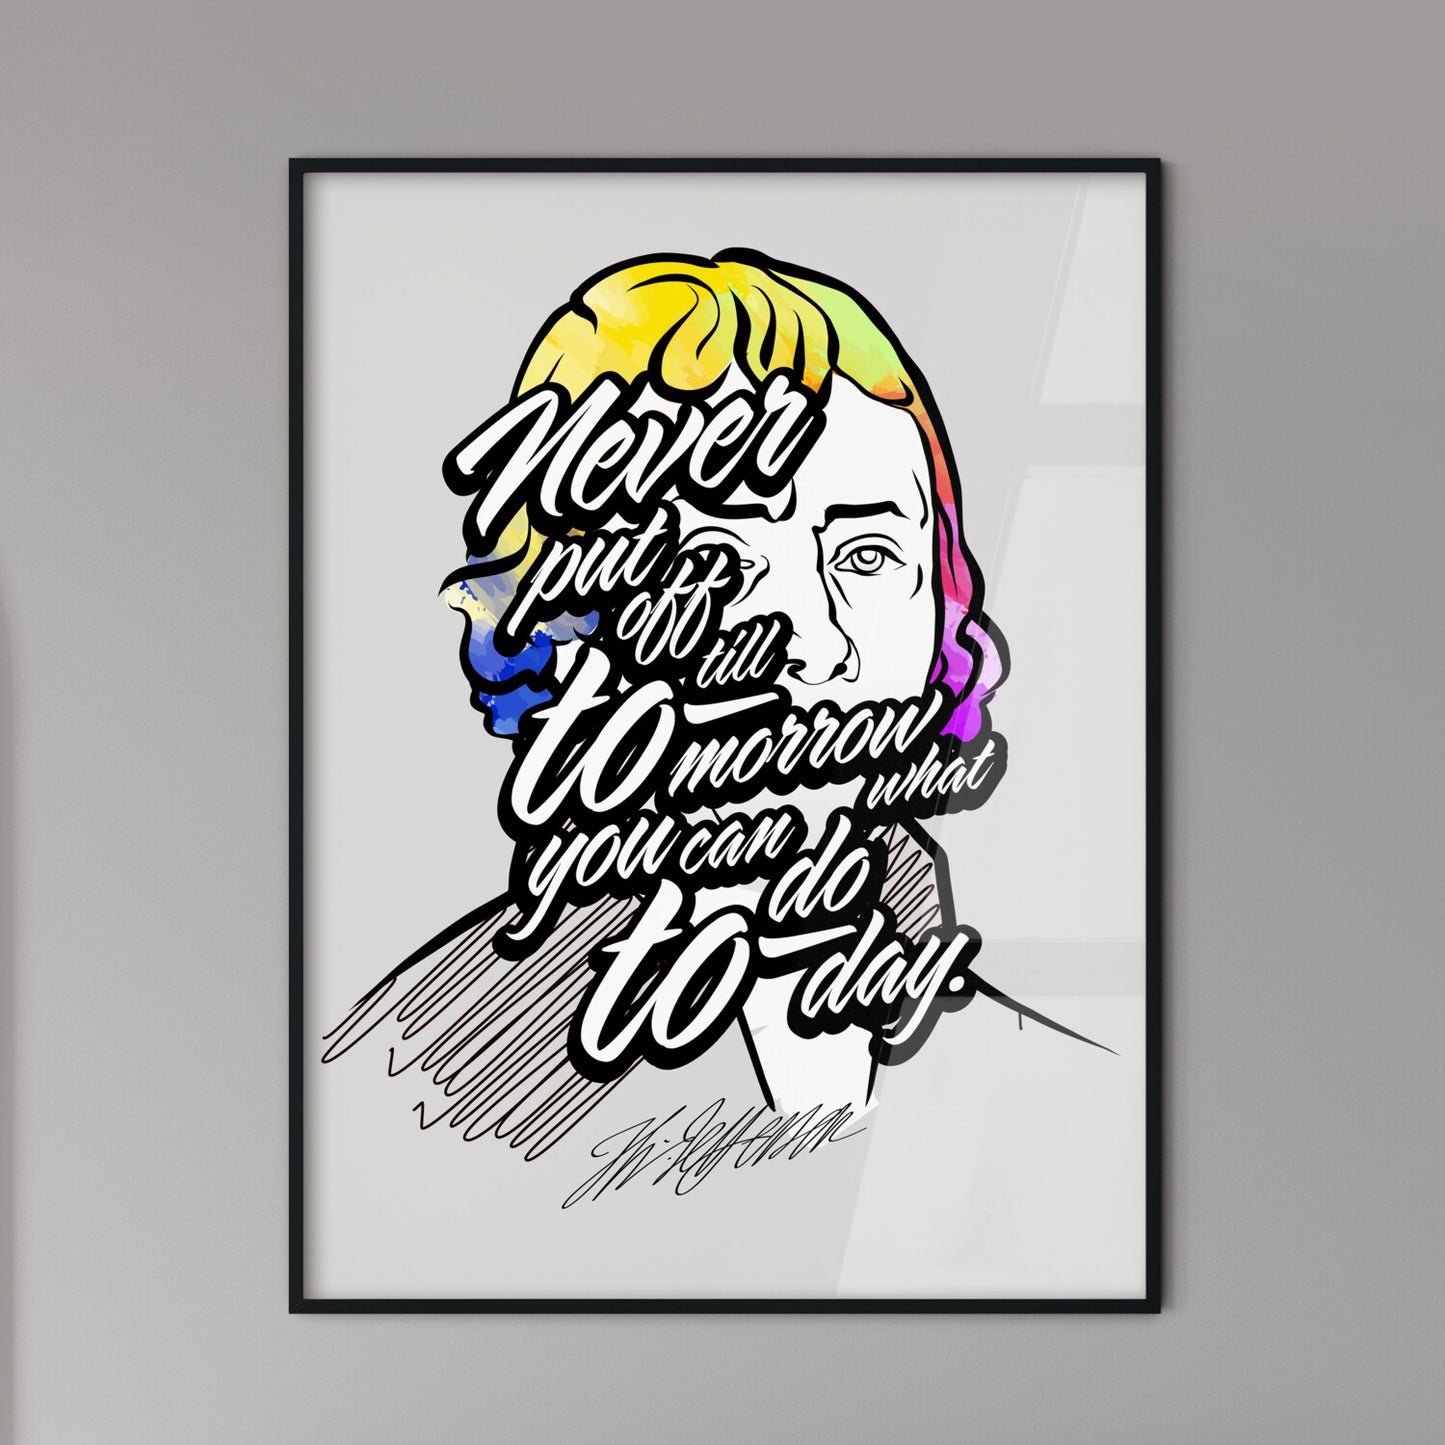 Thomas Jefferson Art Print – Never Put Off Till Tomorrow, What You Can Do Today Quote. Perfect print for patriots.